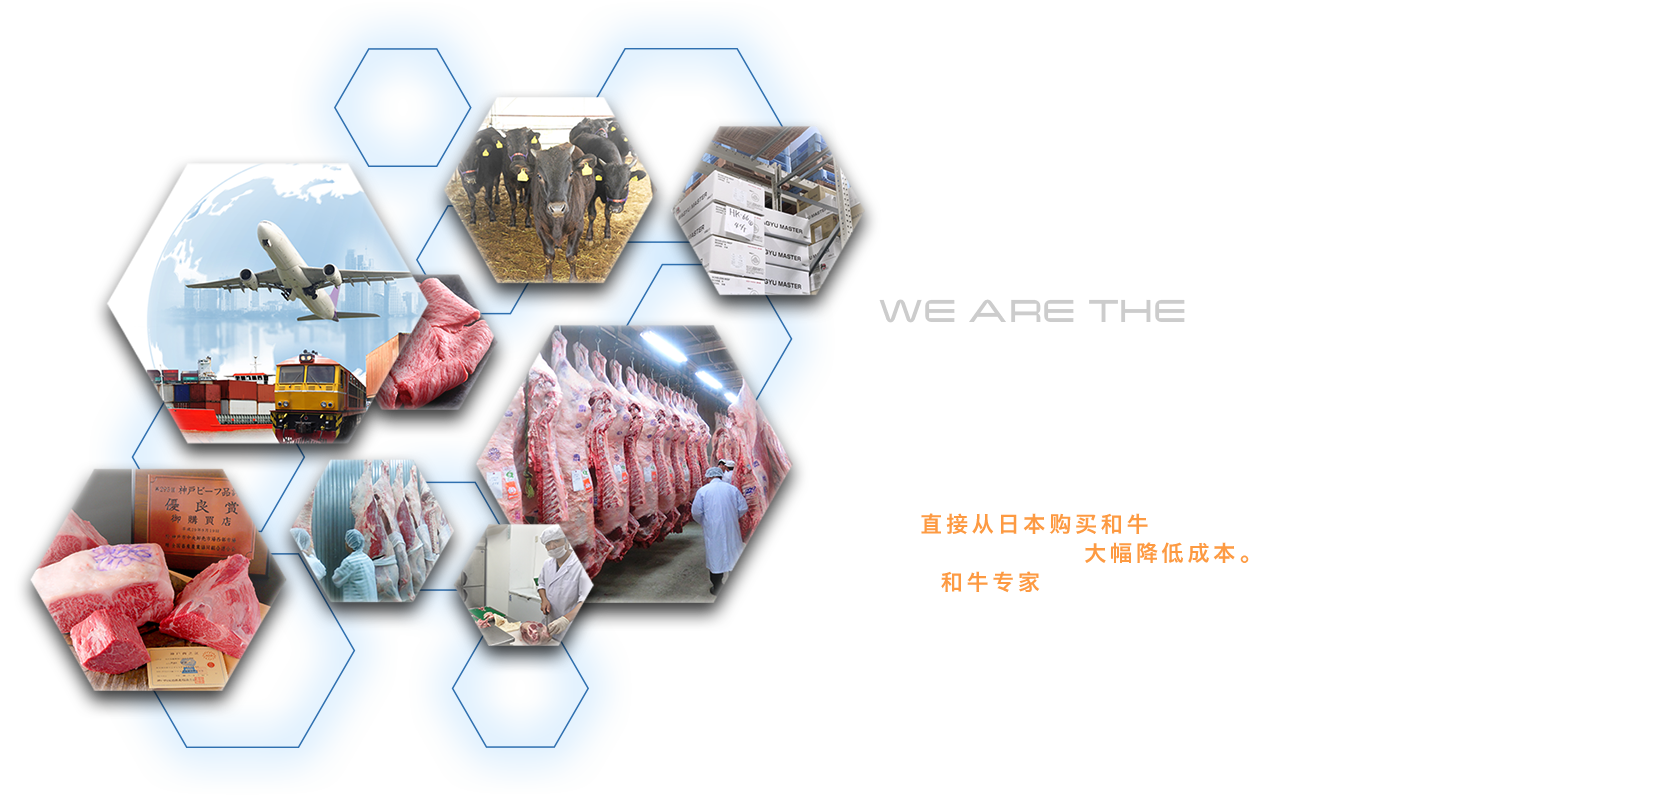 WE ARE THE WAGYU AGENT